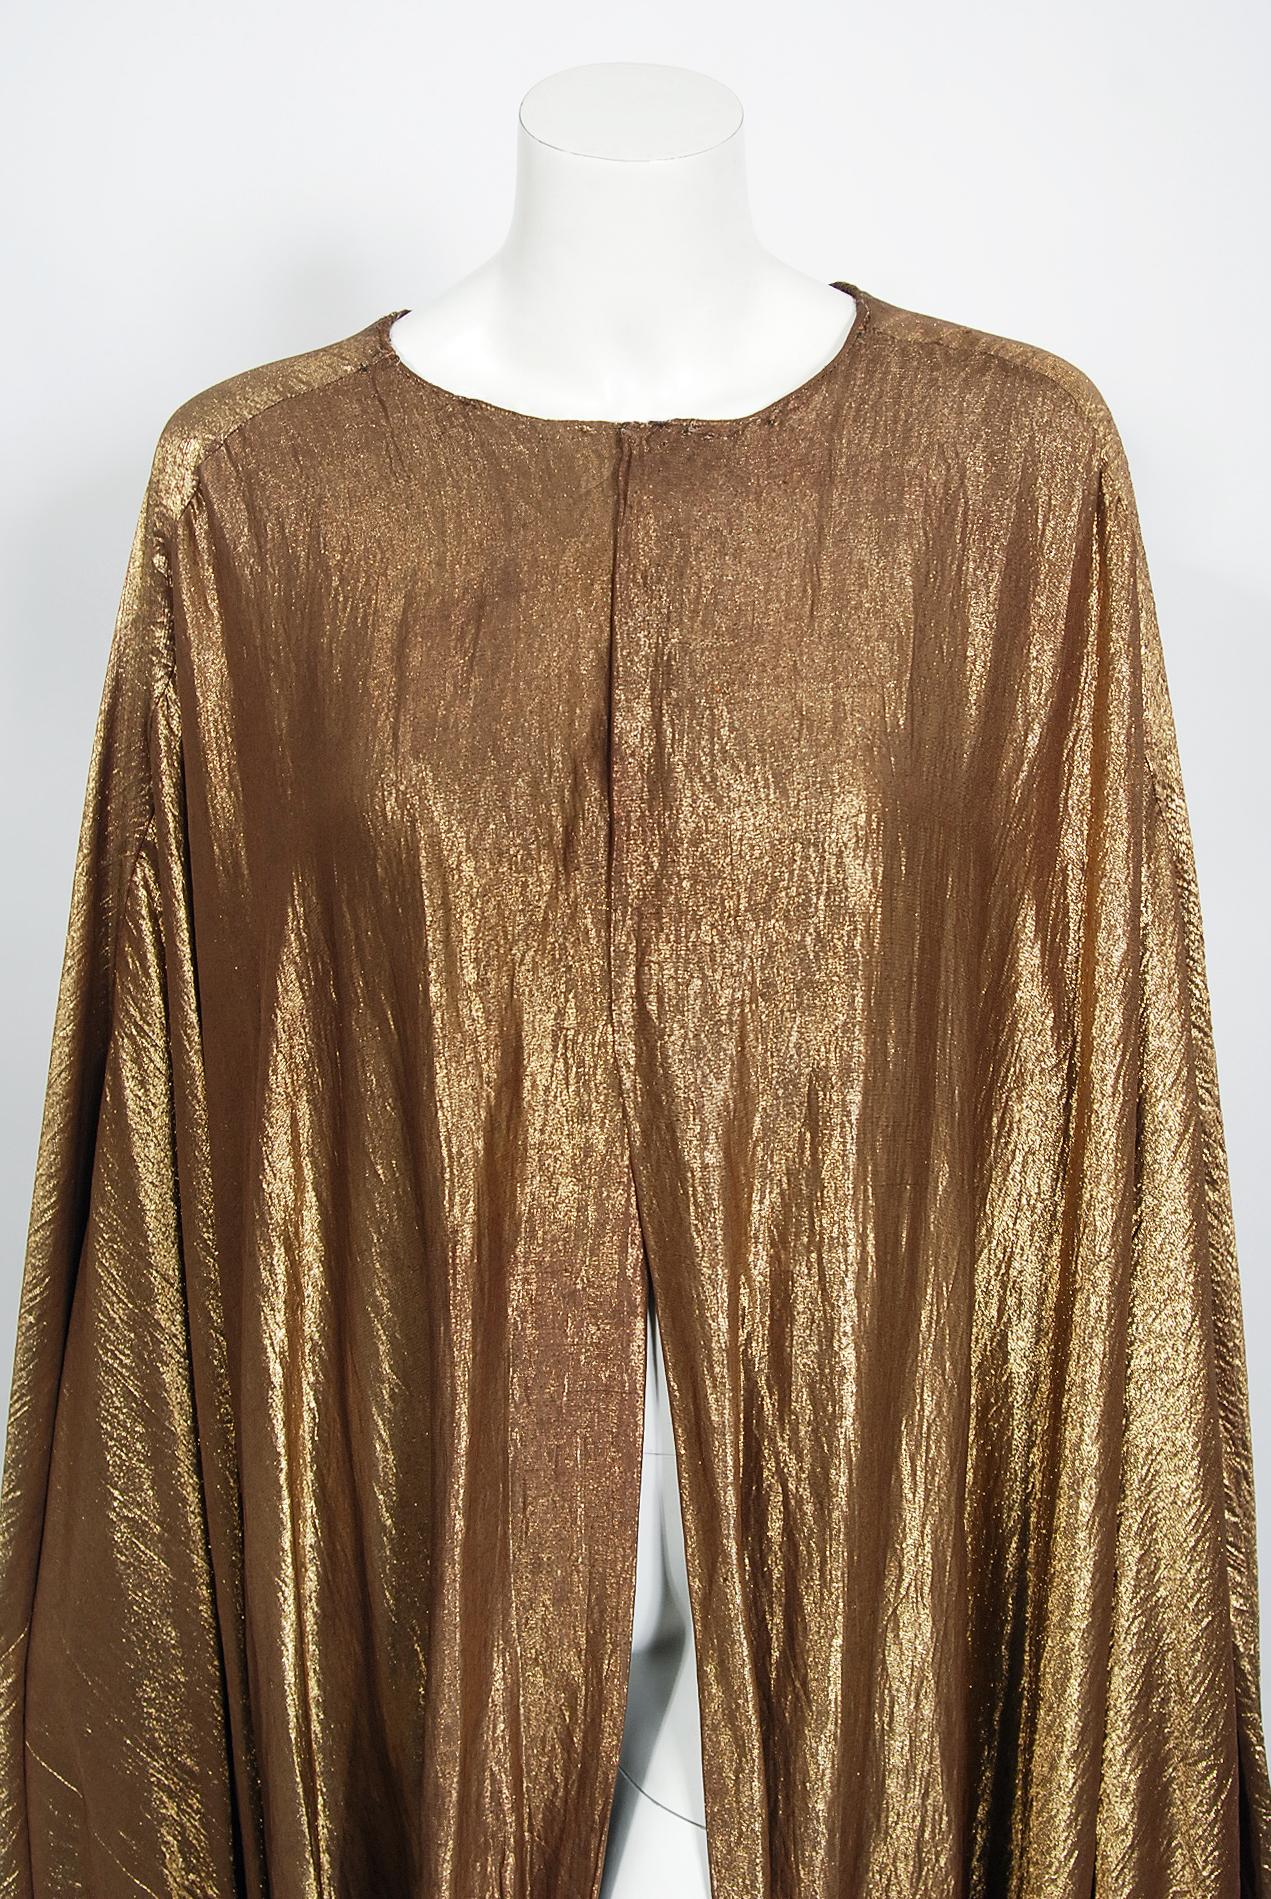 A breathtaking metallic gold lamé custom-made Paramount Pictures full length trained cape dating back to the early 1940's. This gorgeous garment comes with certificate of authenticity so you can be sure this is a true piece of Old Hollywood history.